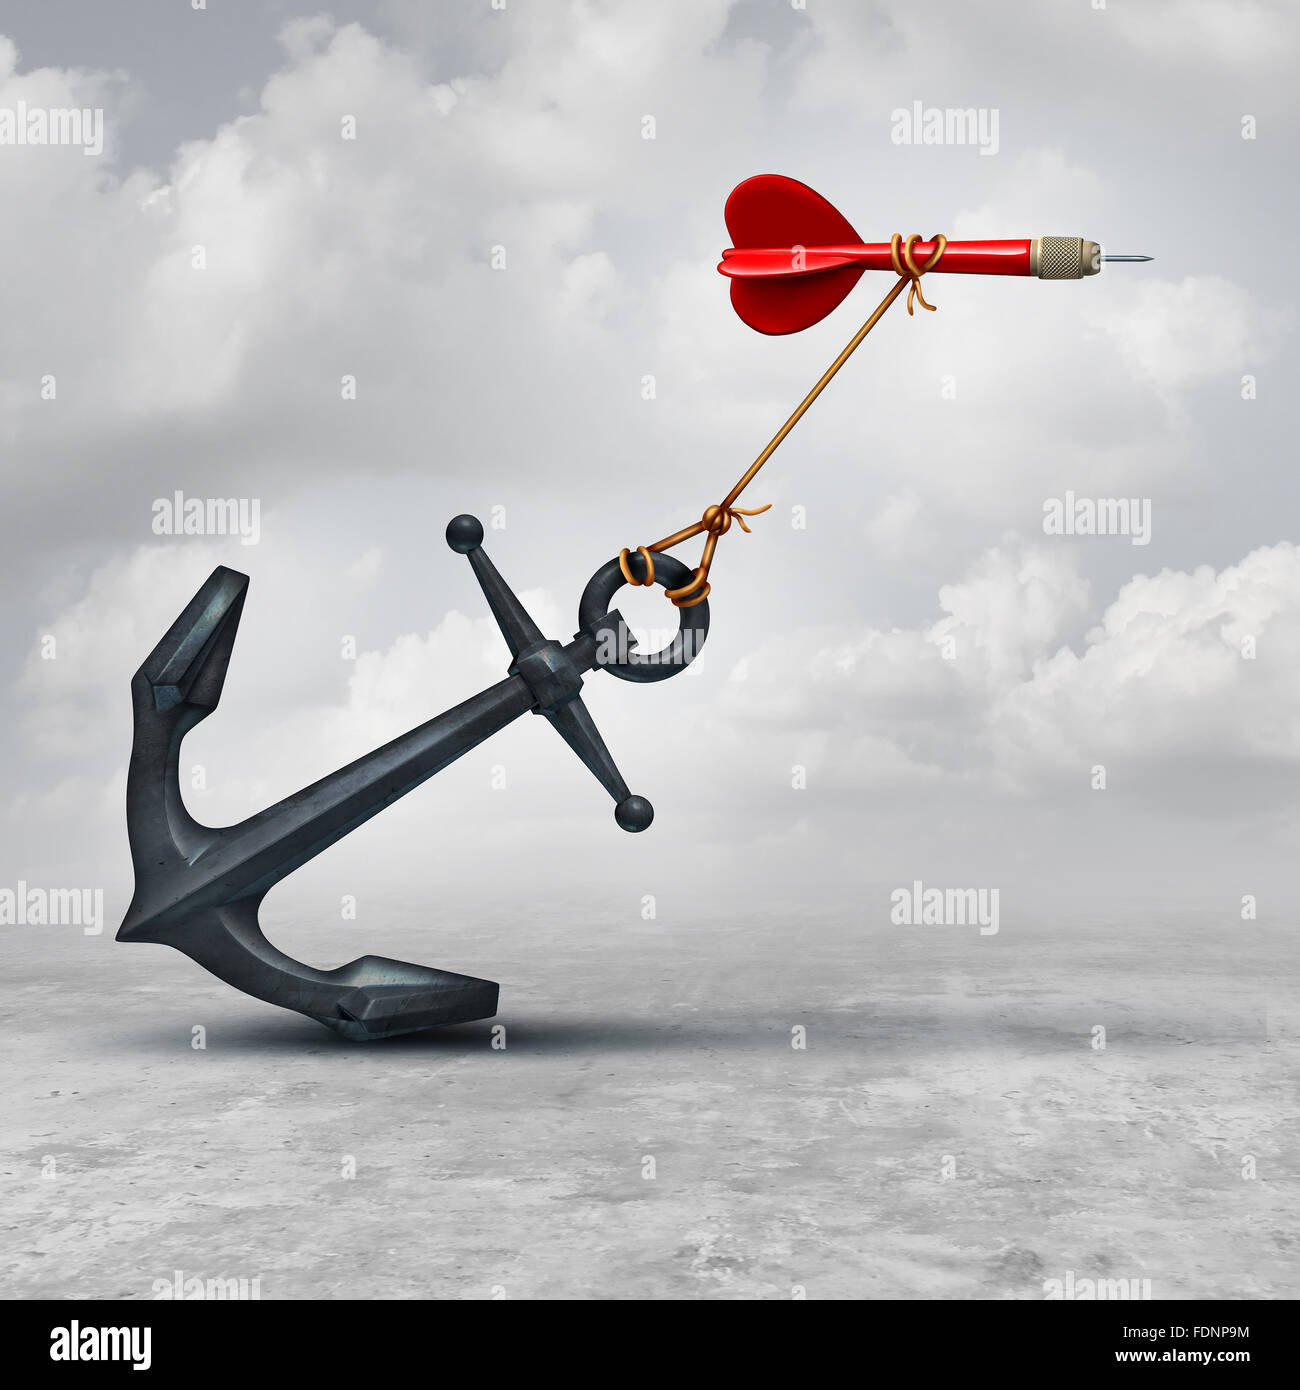 Challenges in business as a dart being slowed down by a heavy anchor as an adversity metaphor and symbol or overcoming a handicap to achieve your goal to reach the target. Stock Photo